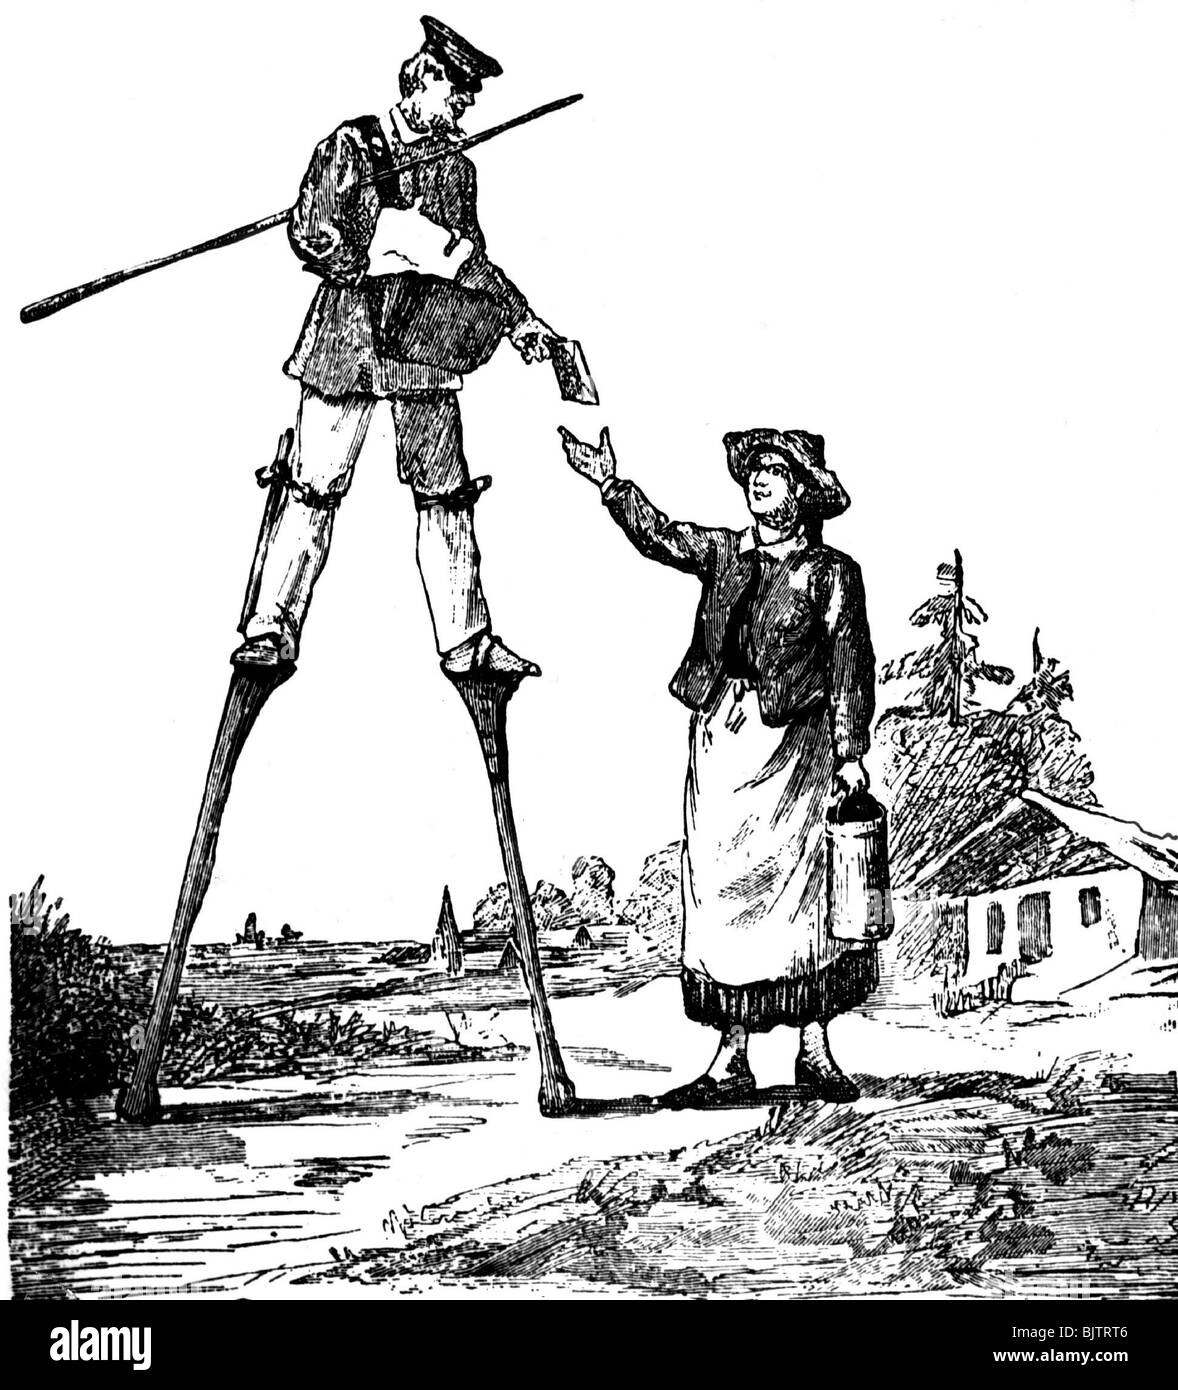 mail / post, postman, with stilts, France, historic, historical, 19th century, for almost impassable, rough regions, region, stilt, postman, mailman, postmen, mailmen, letter, letters, farmer's wife receipting mailing, carrier, carriers, messenger, deliverer, deliverers, oddity, profession, professions, people, Stock Photo